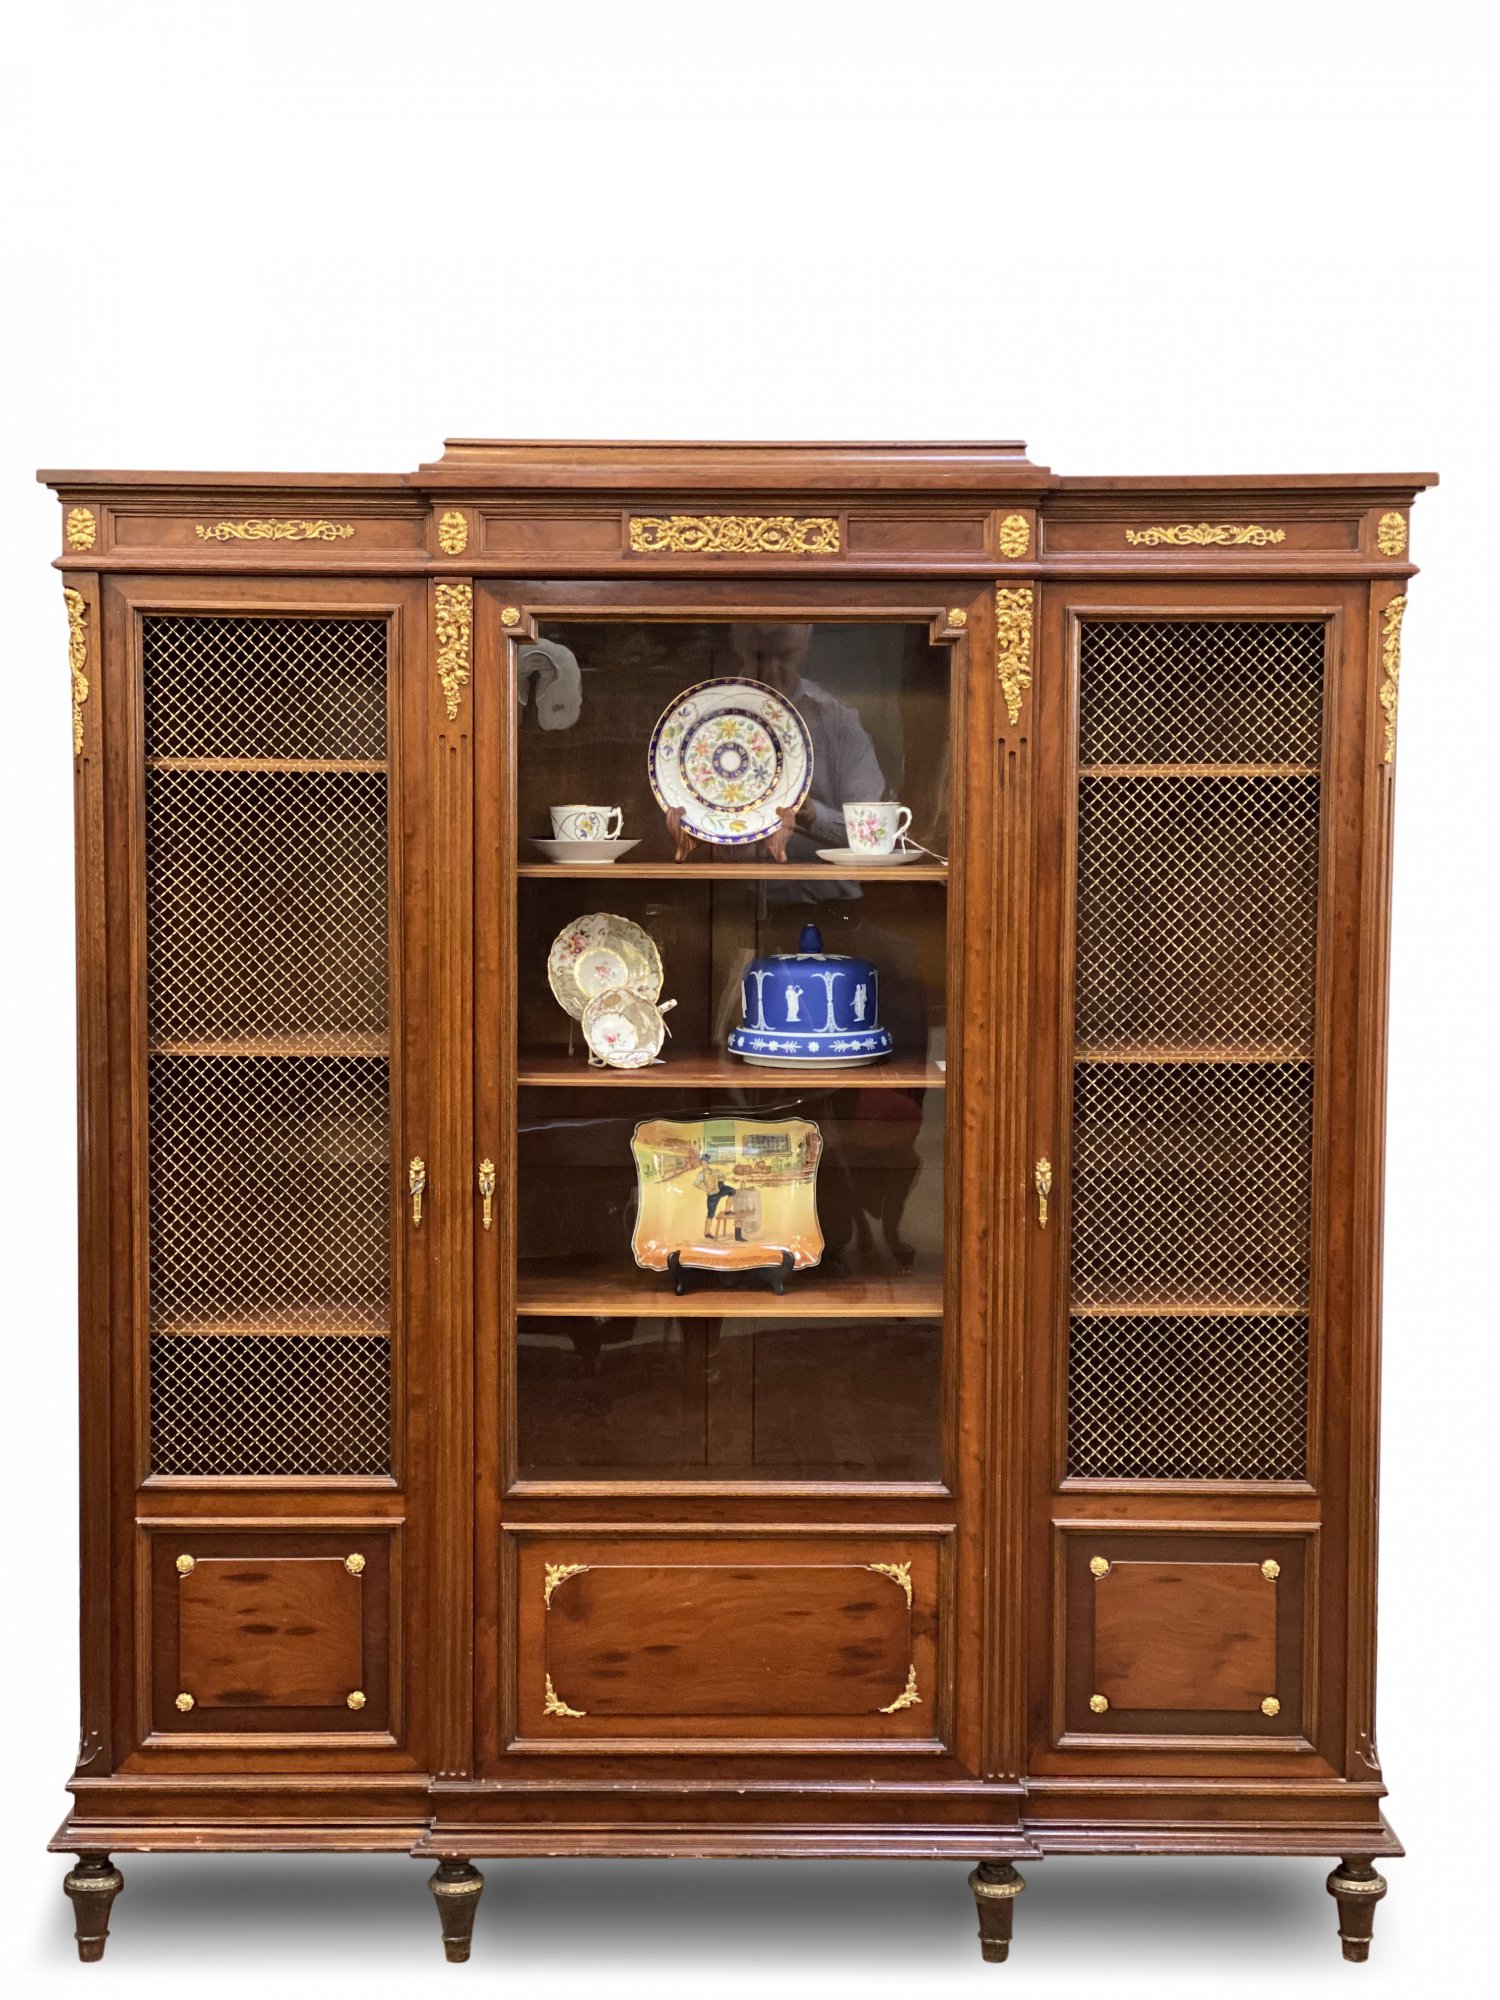 French 19th Century 3 Door Breakfast Bookcase, With Glazed Central Door Flanked by Mesh Panel Door, Decorated With Ormolu Mounts